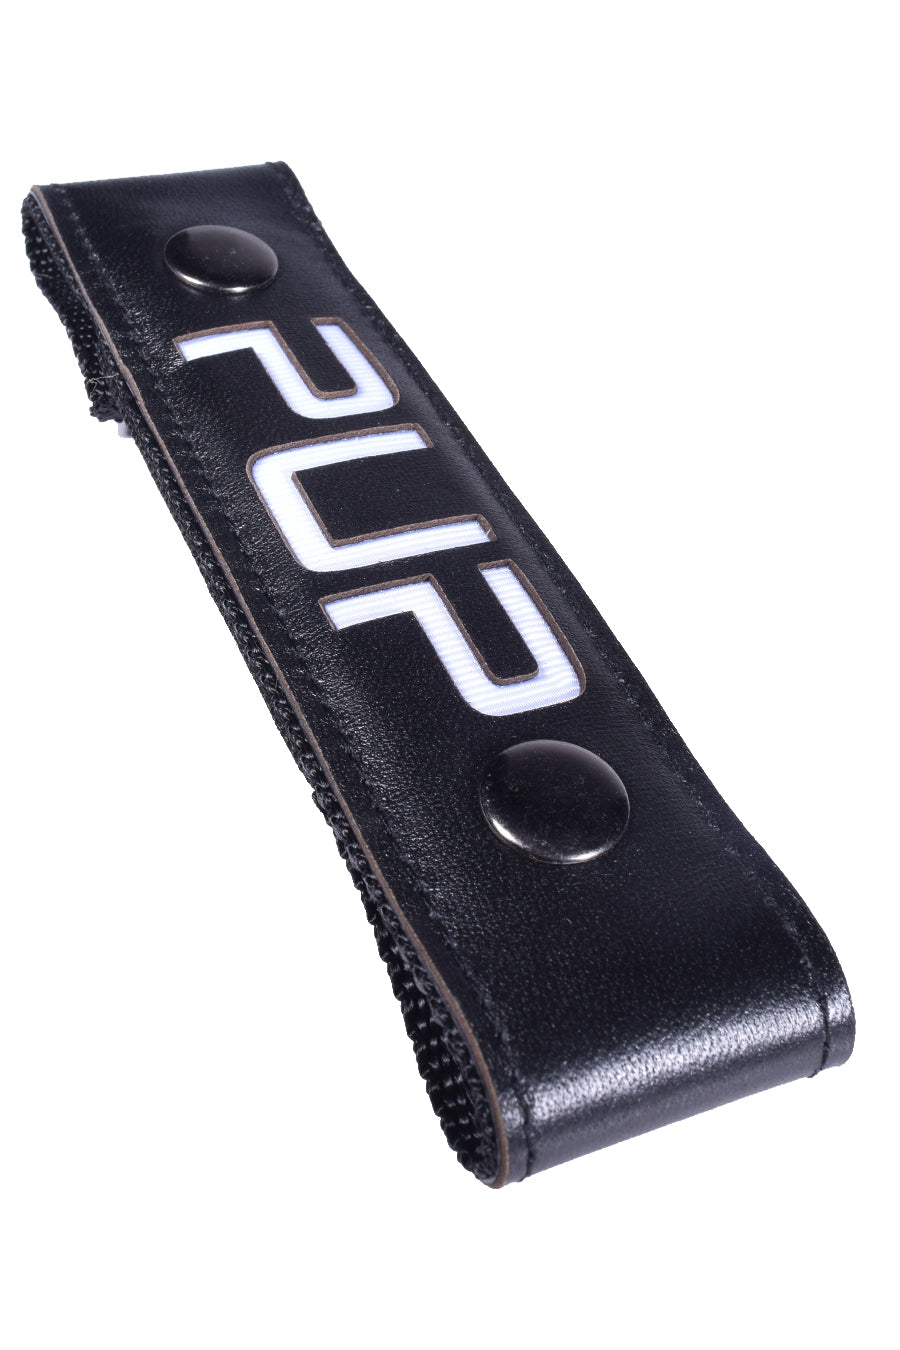 GLOW CENTER STRAP- PUP